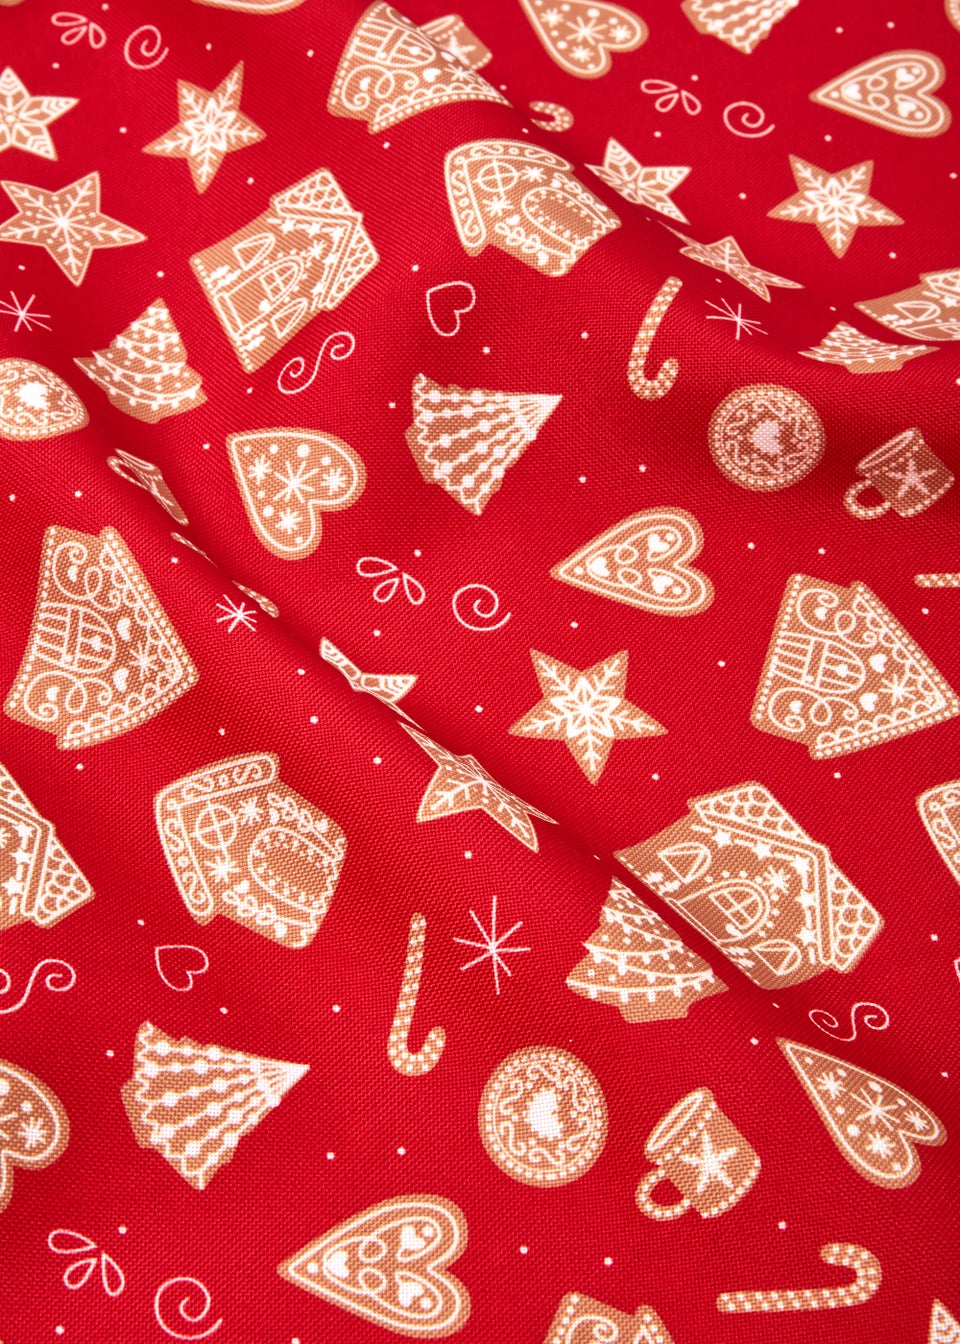 Red Gingerbread Christmas Tablecloth (200cm x 135cm)